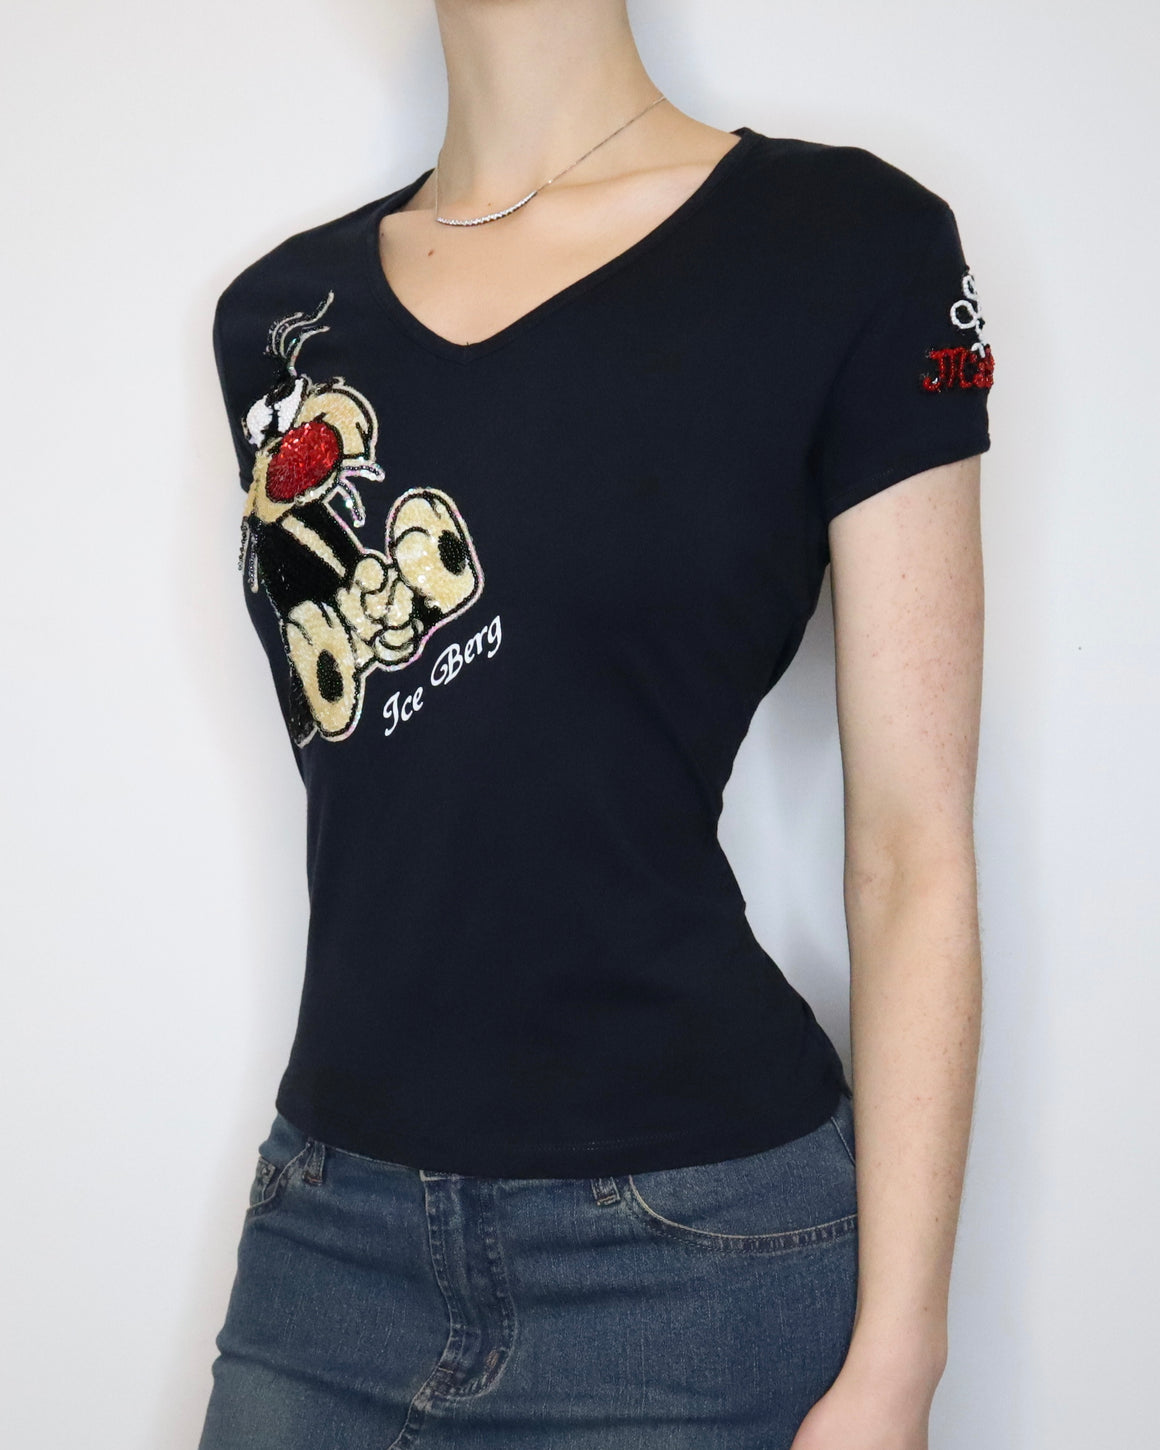 Sylvester the Cat Tee (Large) 